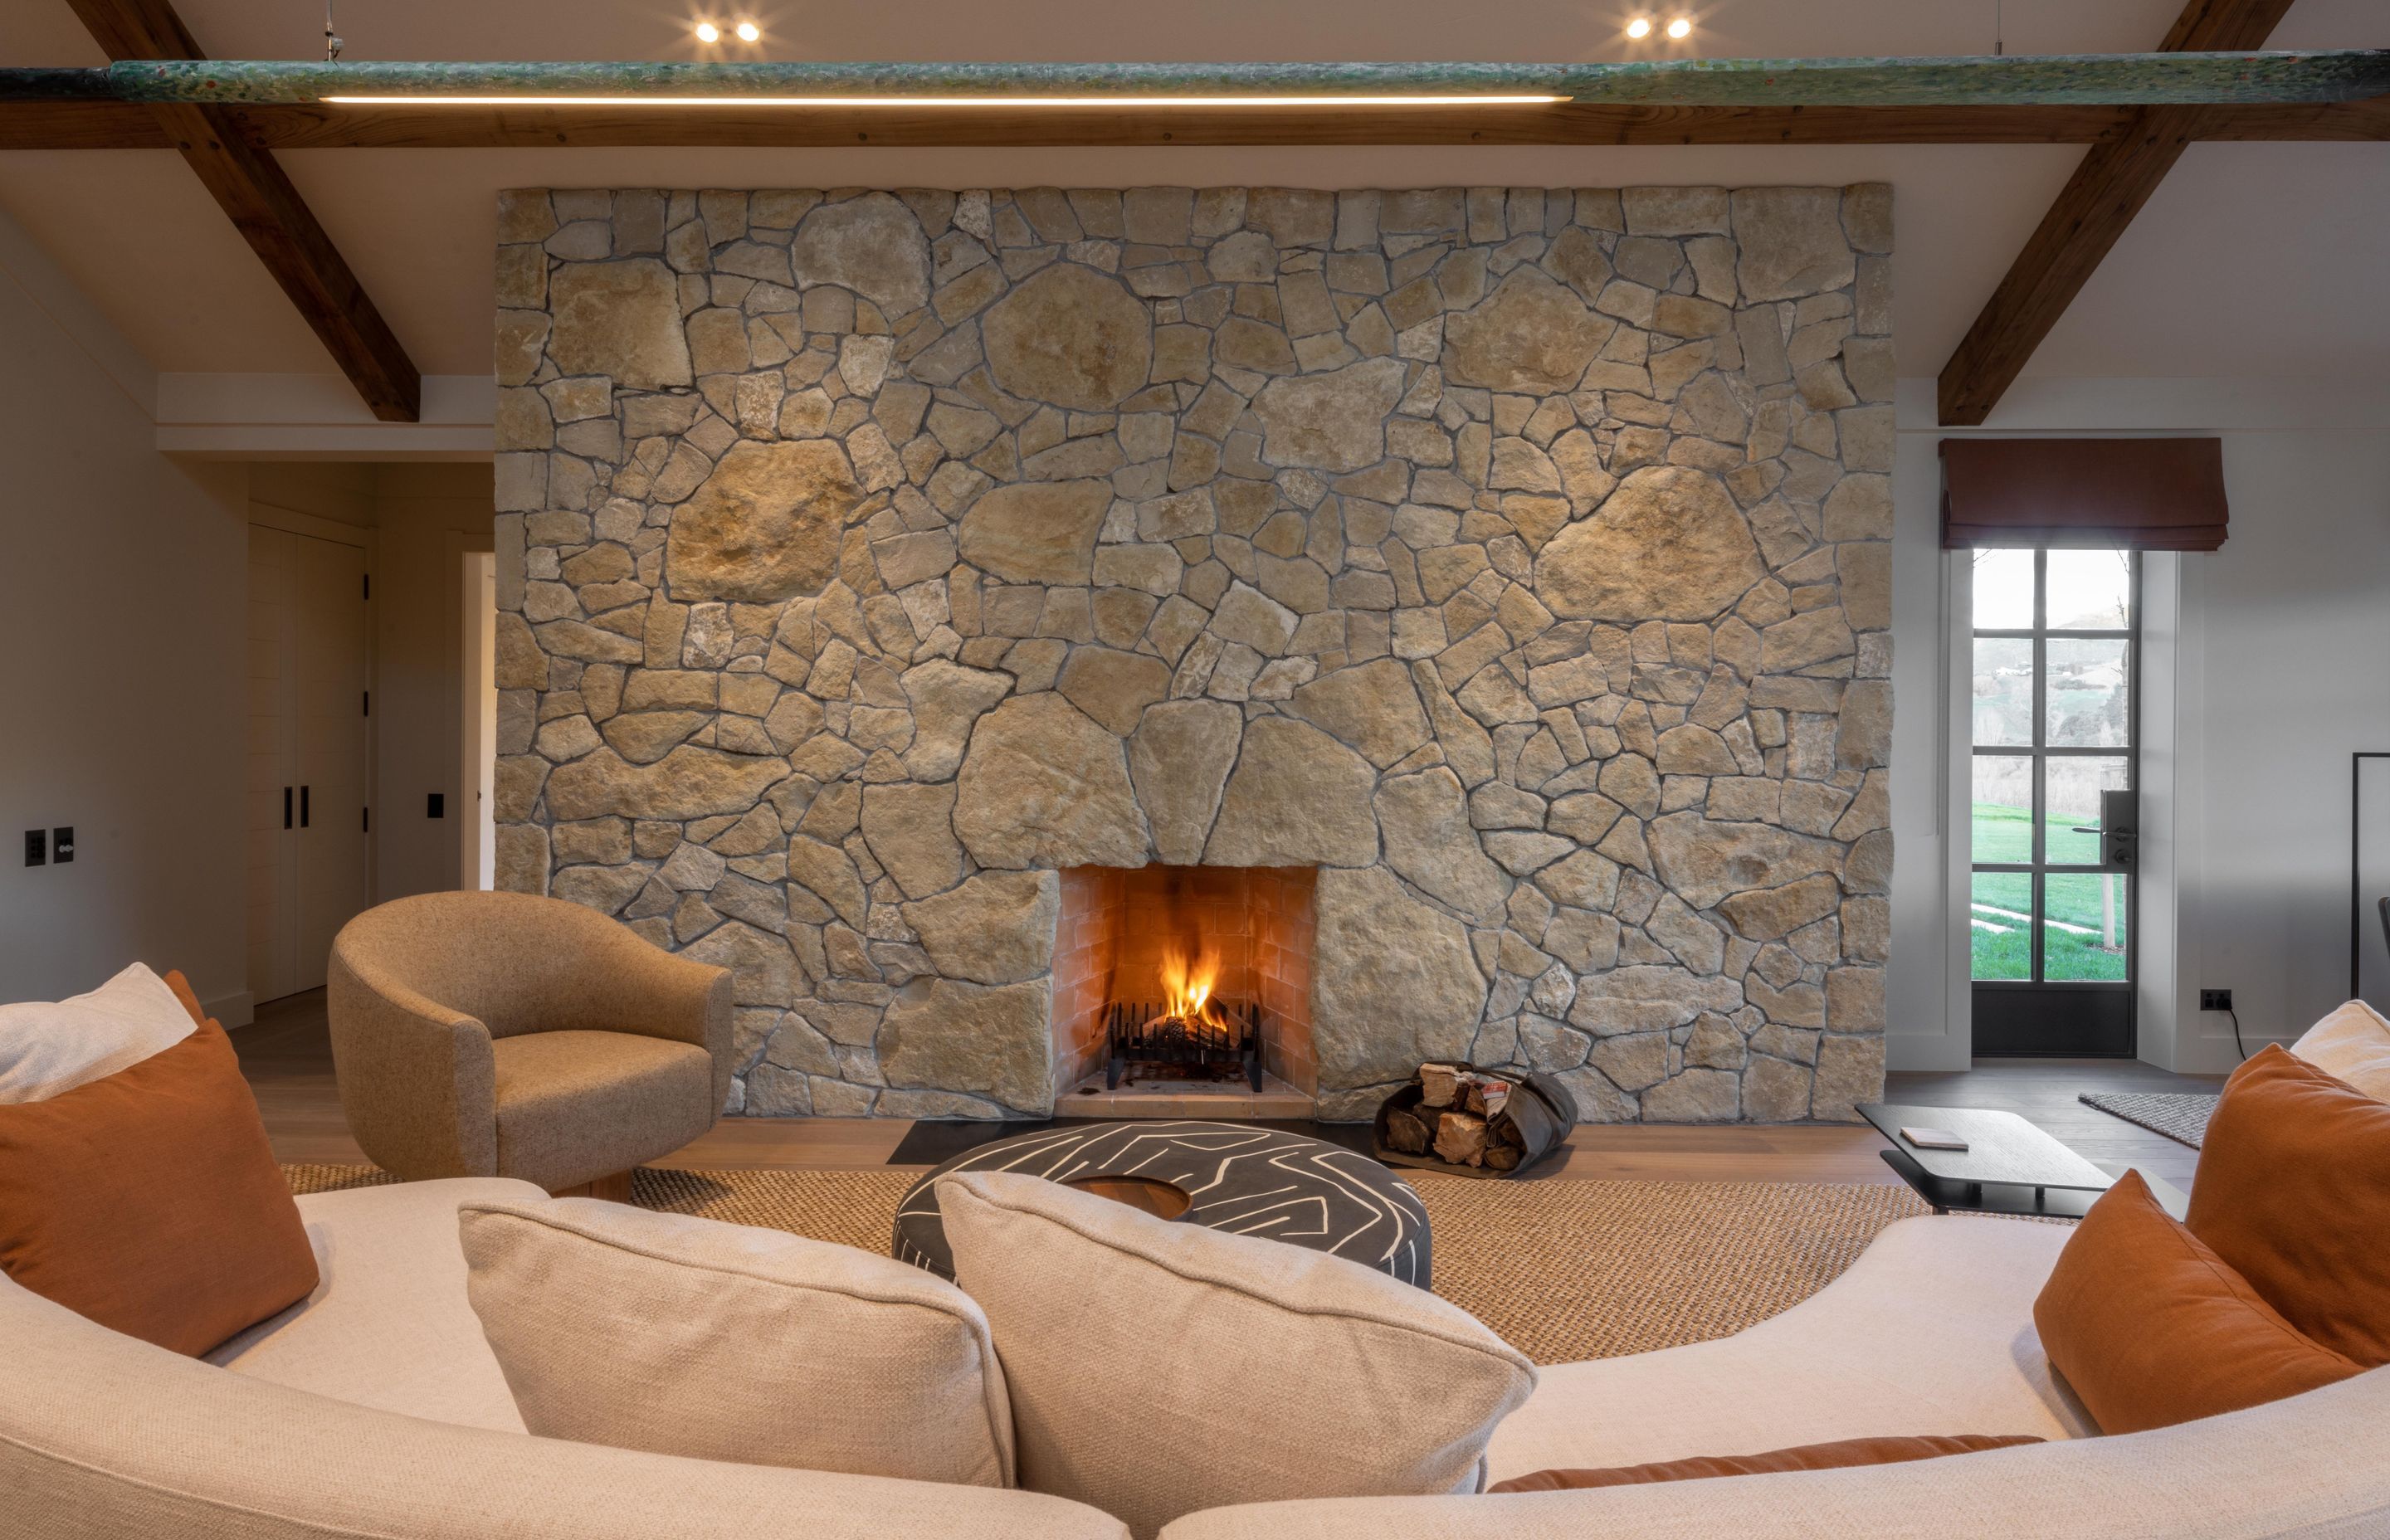 This fireplace installation features bespoke over-sized stones, helping it stand out.